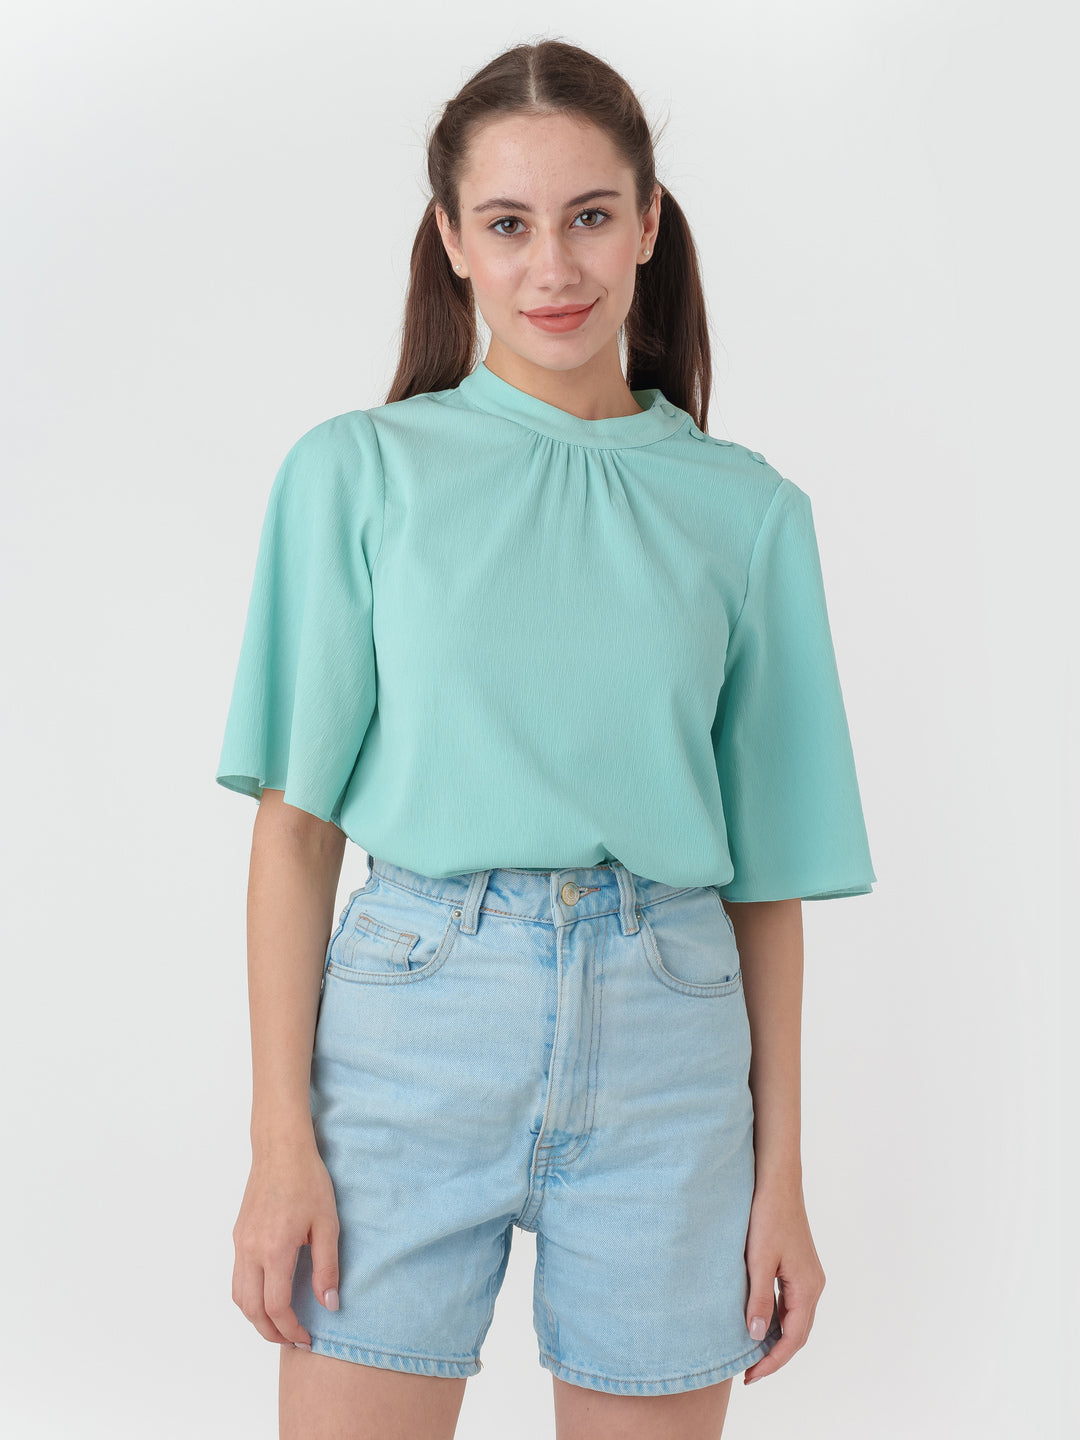 Turquoise_Solid_Regular_Top_2